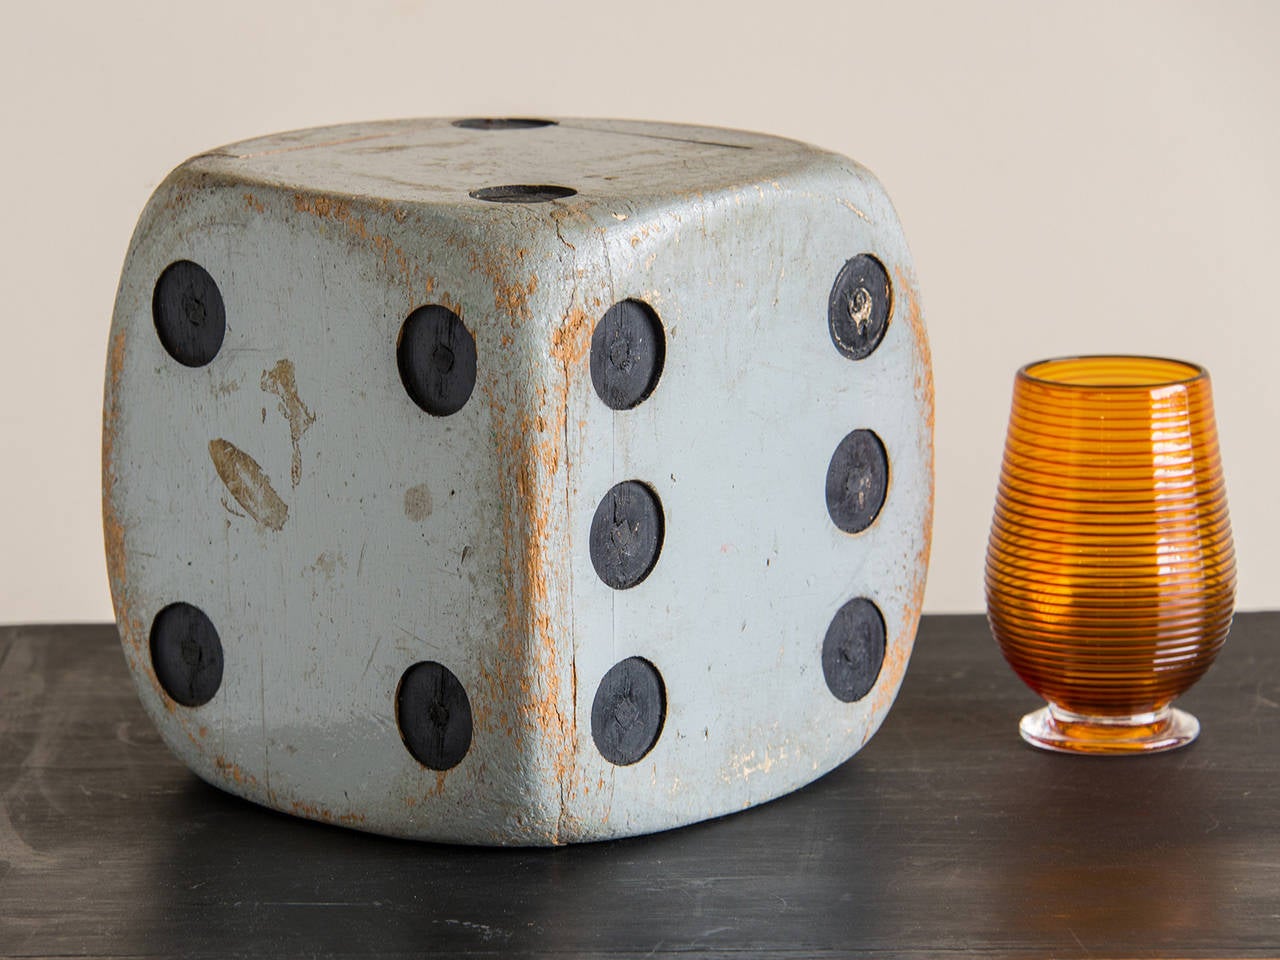 A vintage large scale painted wood die from France c.1940.  This die (individual term for the multiple dice) was originally used in a gaming establishment or a shop that specialized in games of chance as a display piece designed to galvanize